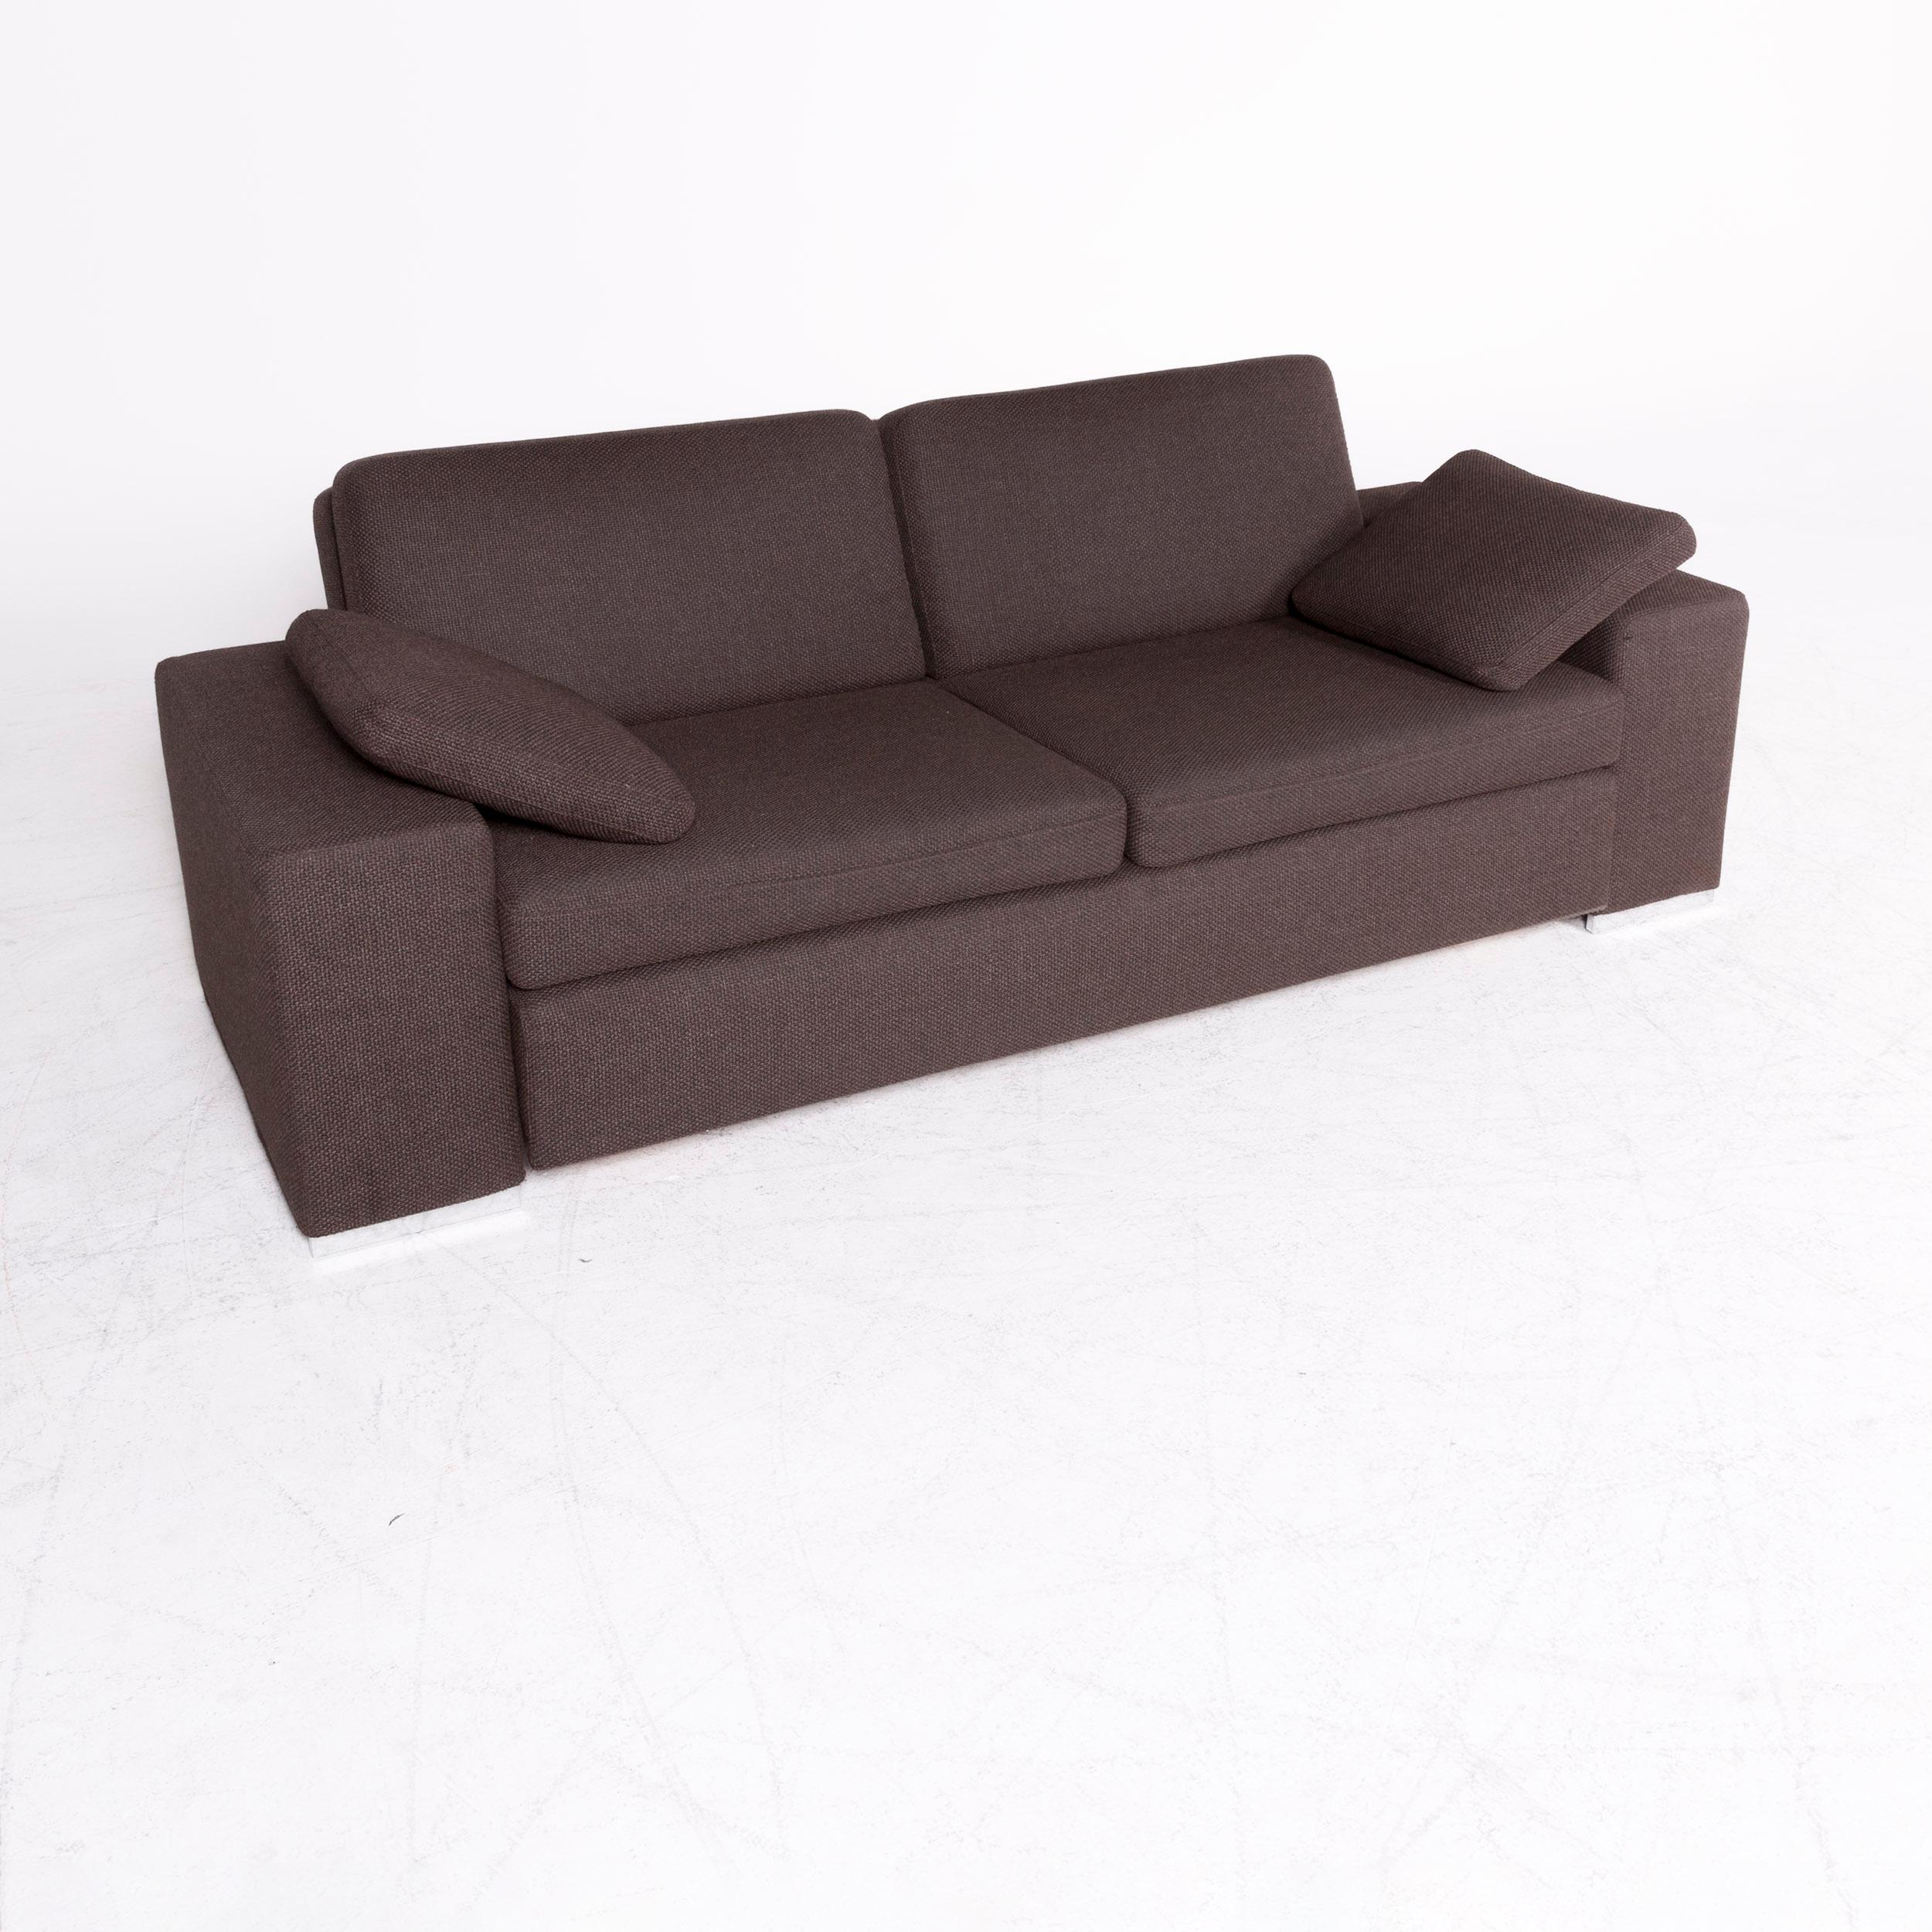 We bring to you a Brühl & Sippold designer fabric sofa brown two-seat sofa function sofa bed.

Product measurements in centimeters:

Depth 103
Width 215
Height 77
Seat-height 41
Rest-height 50
Seat-depth 58
Seat-width 118
Back-height